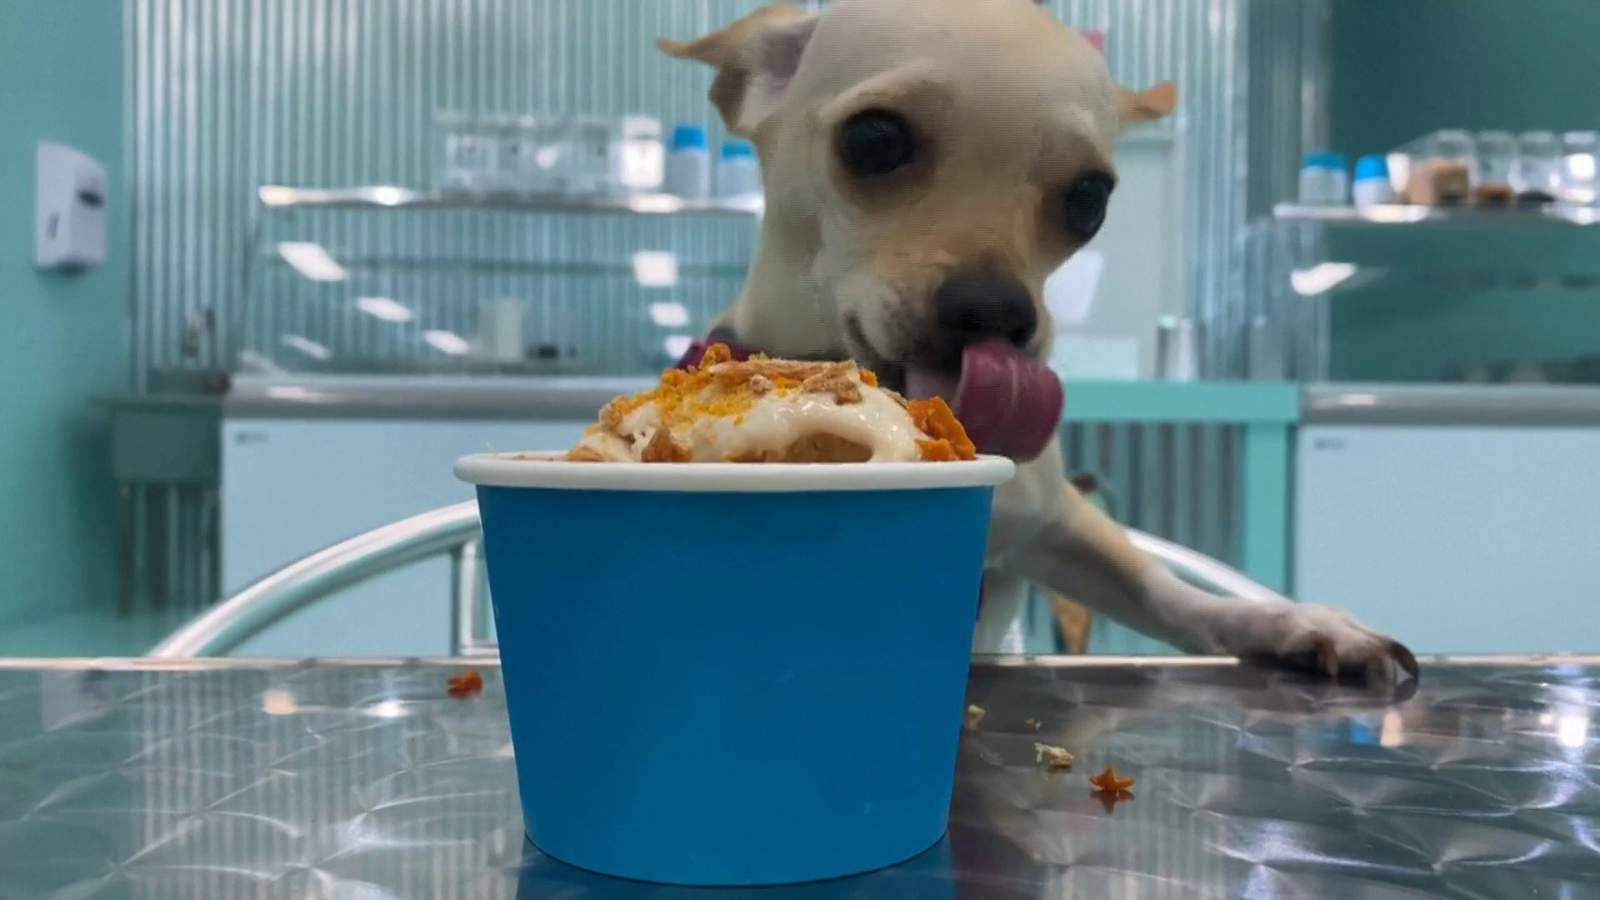 Virginia Beach prepares for Dog Days of Summer with ice cream shop for dogs